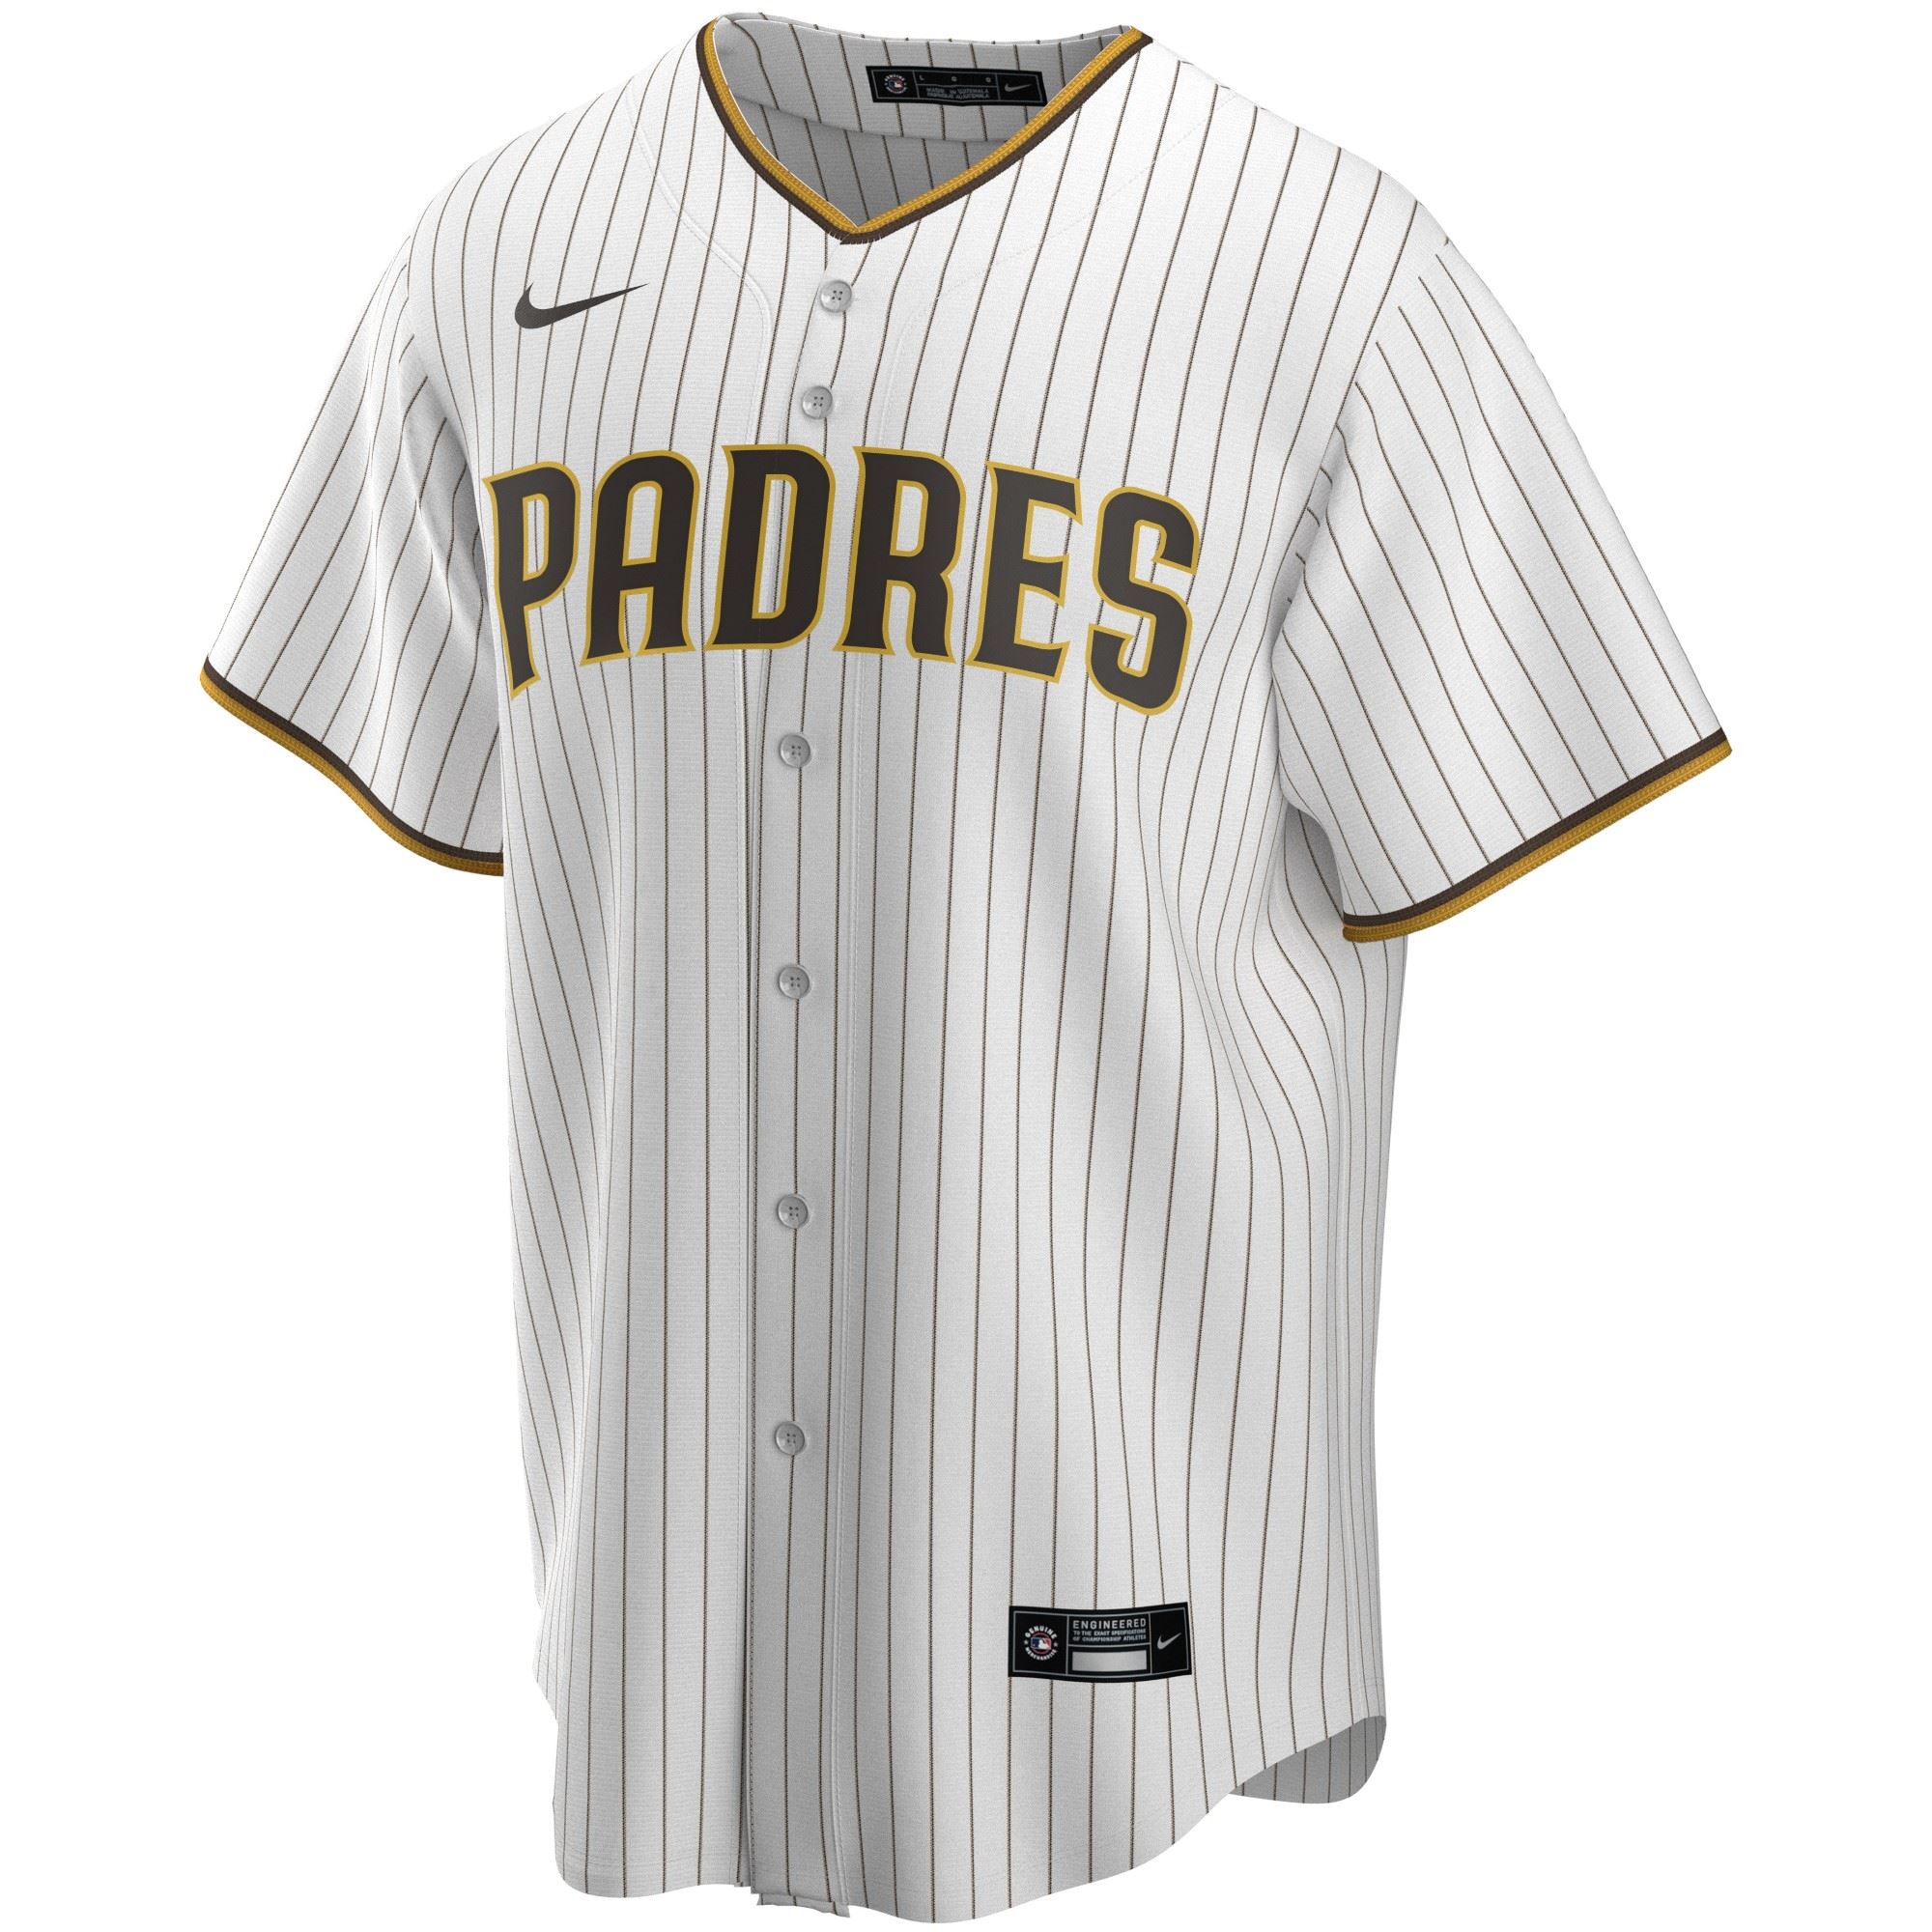 San Diego Padres Official MLB Replica Home Jersey White Nike